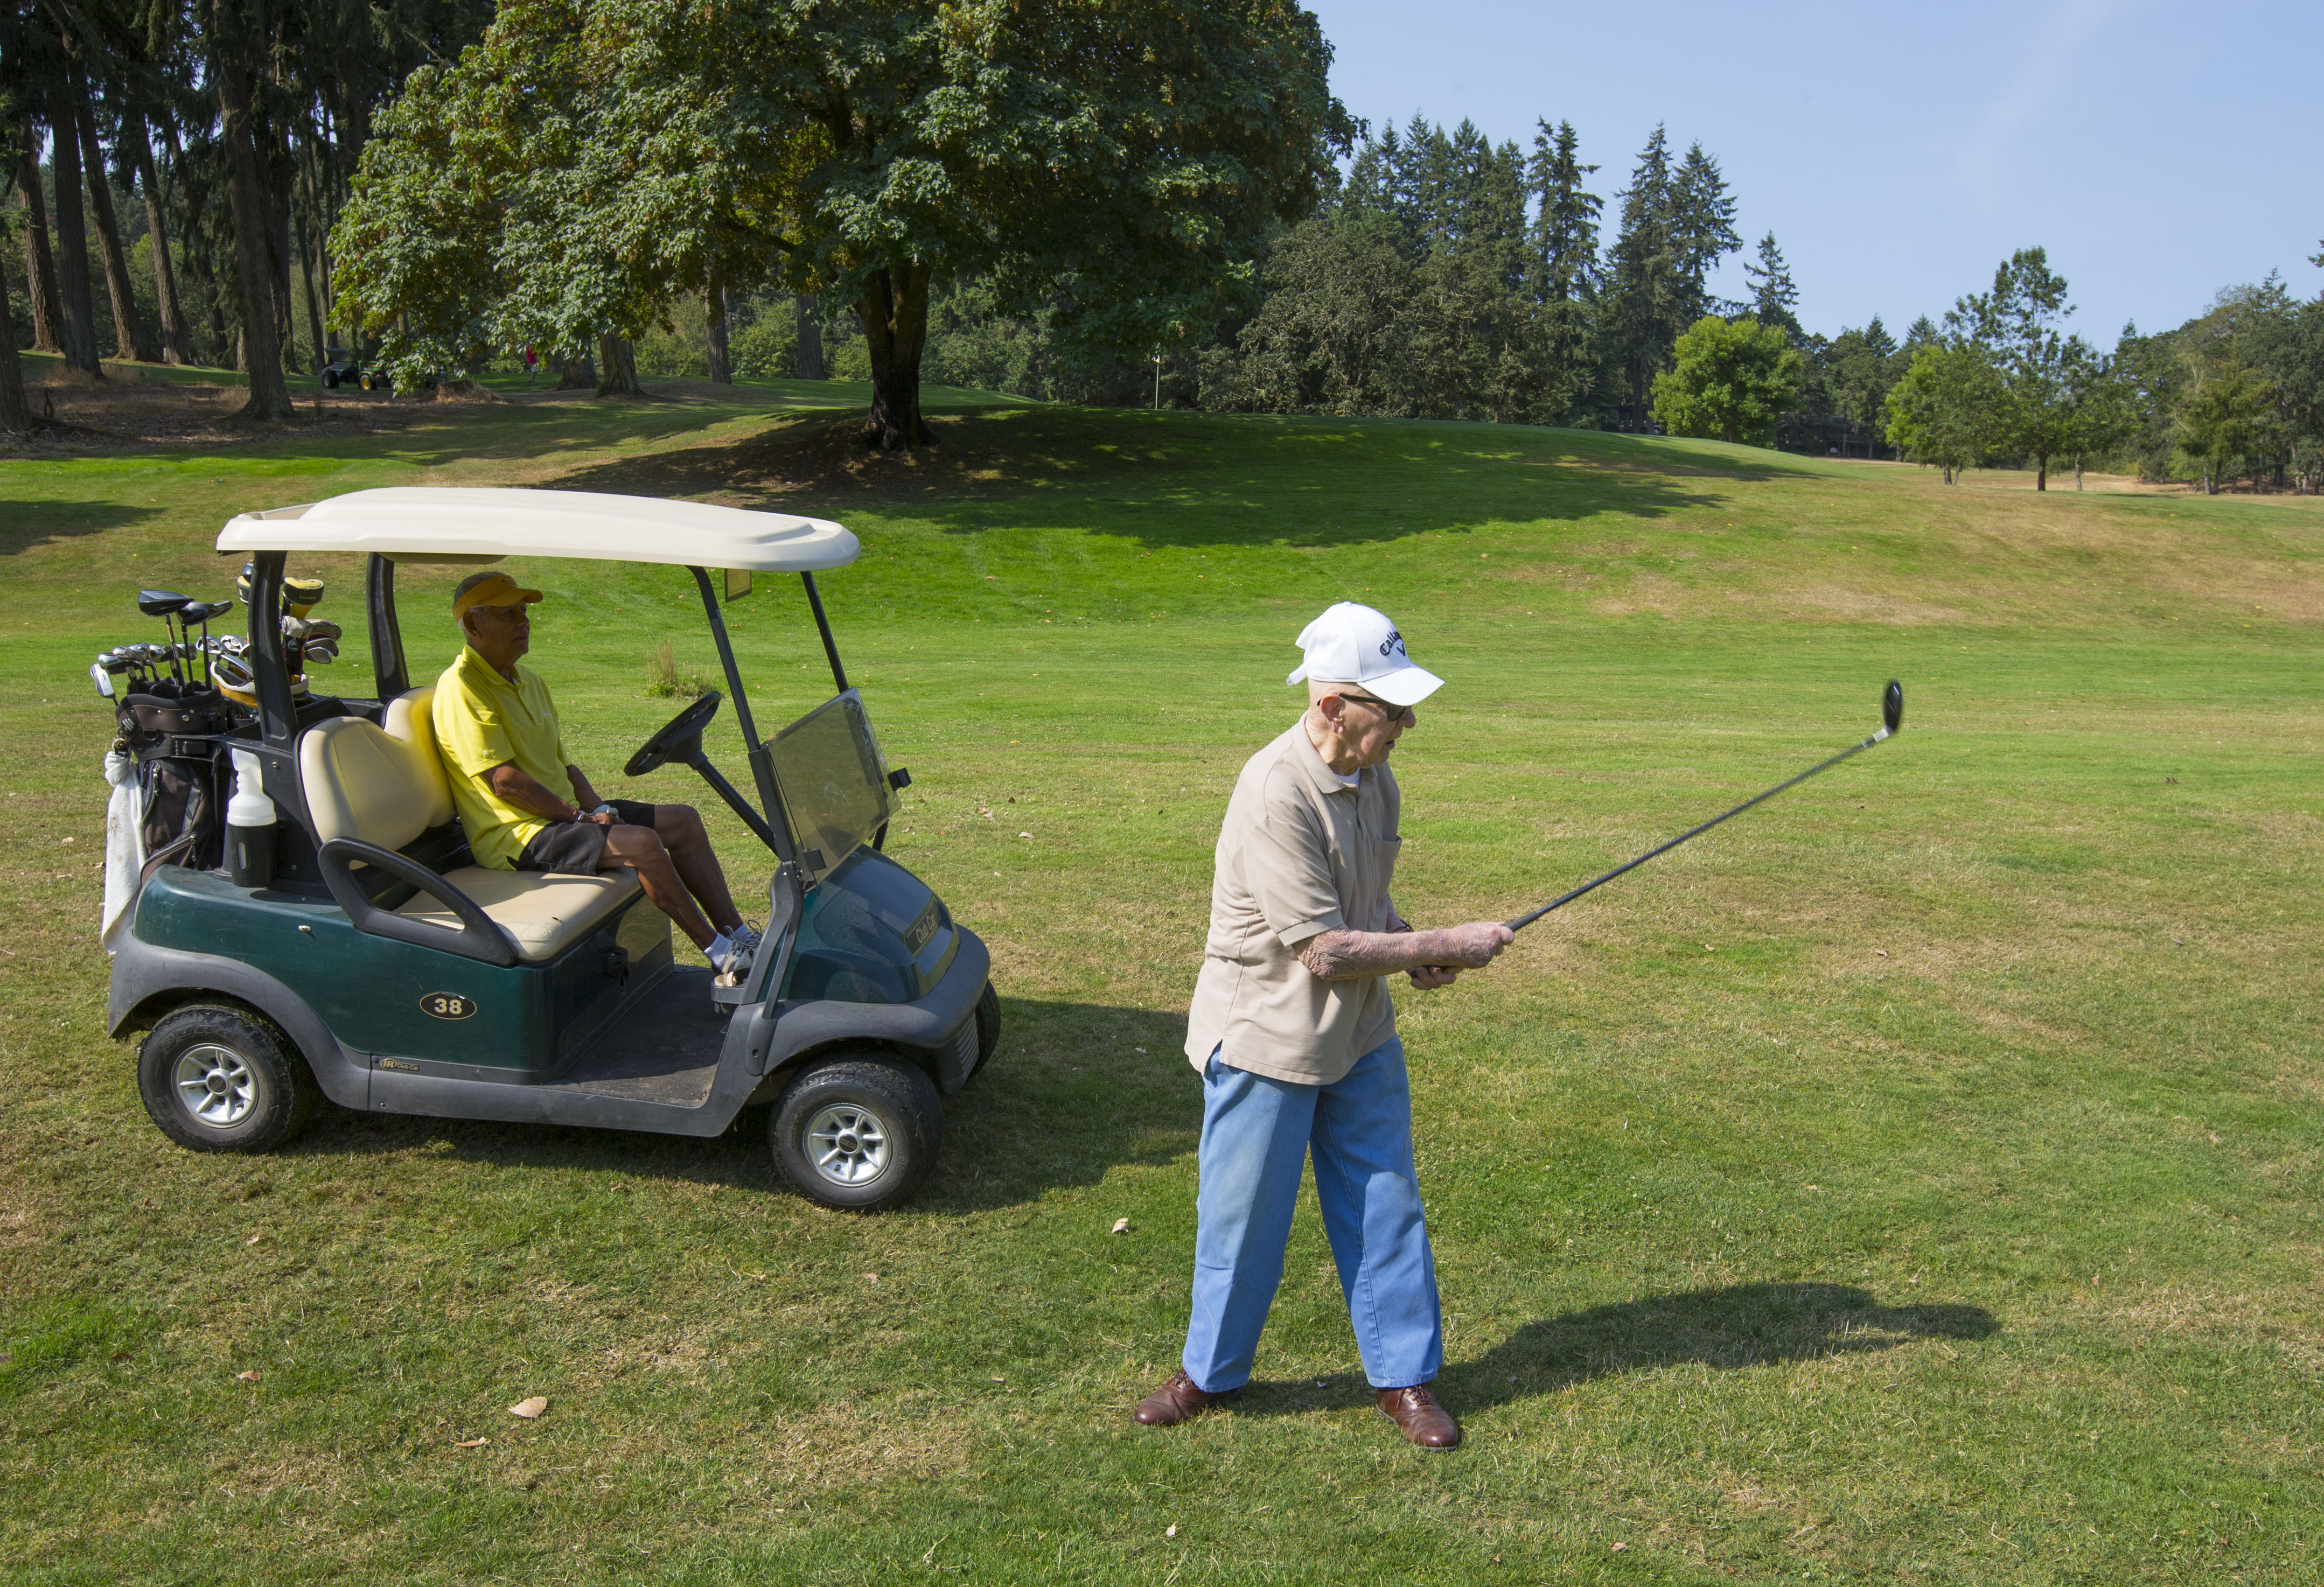 Pinky Murphy: At 95, playing golf for fun and camaraderie